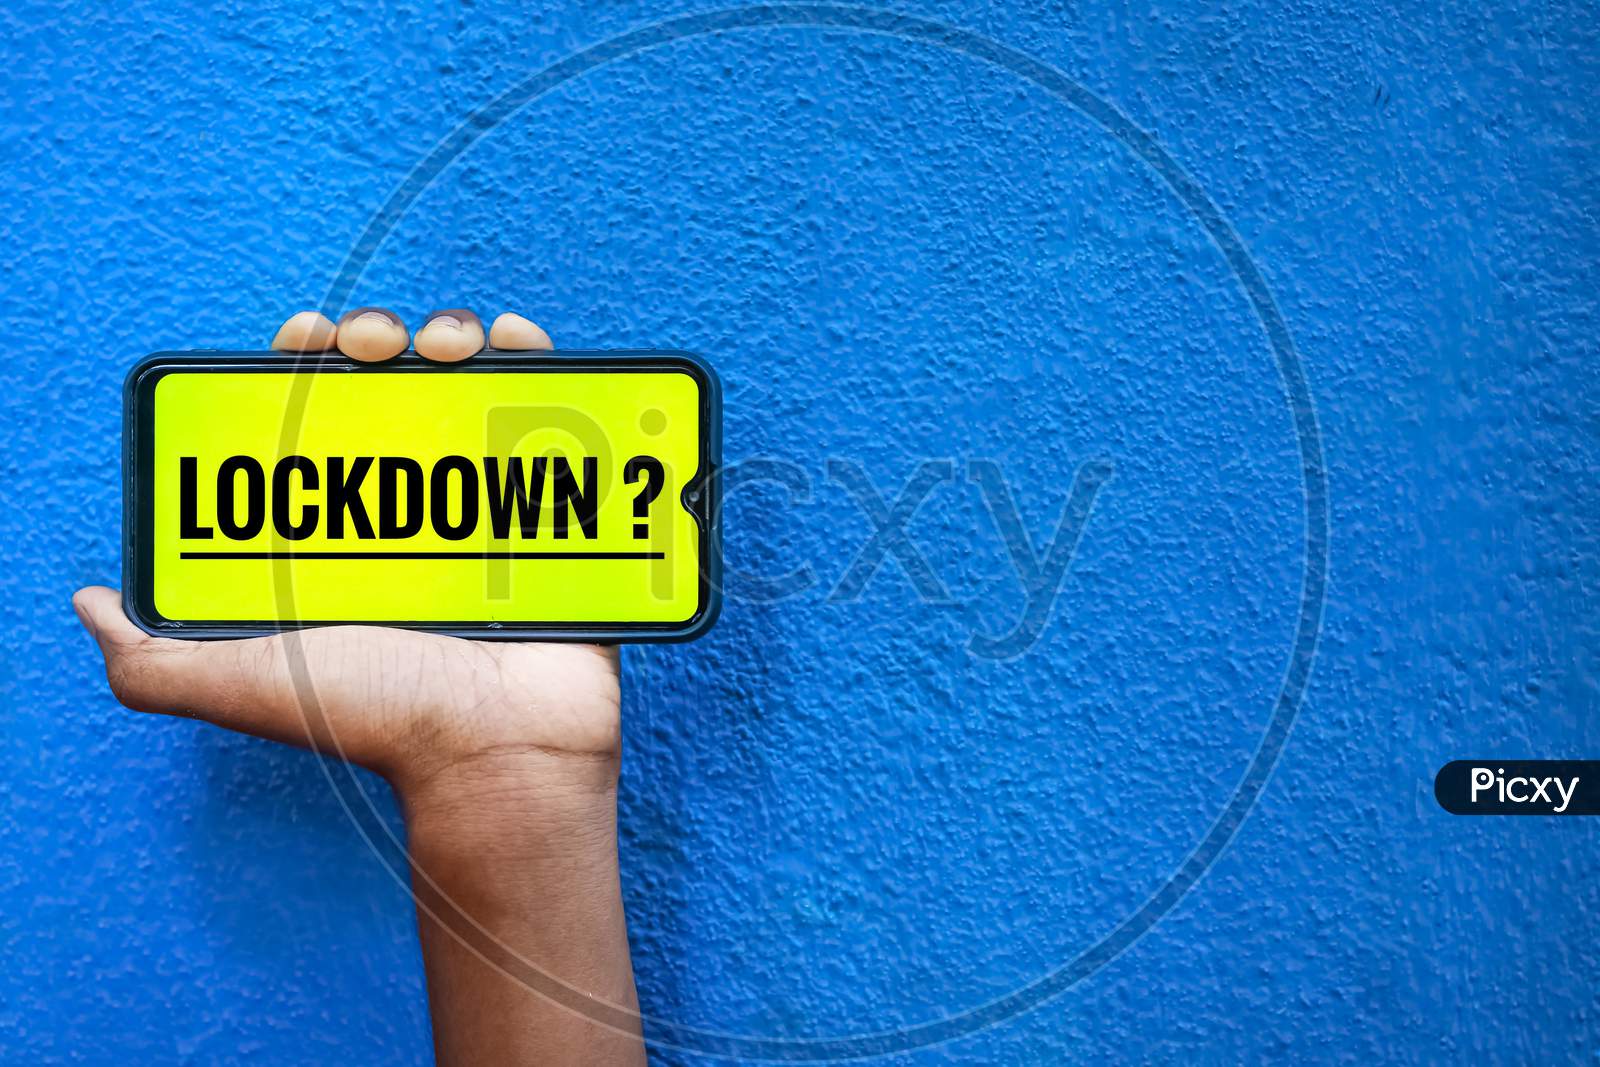 Lock Down Wording For Covid-19 On Smart Phone Screen Isolated On Blue Background With Copy Space For Text. Person Holding Mobile On His Hand And Showing Front Of The Lock Down Corona Virus Screen.